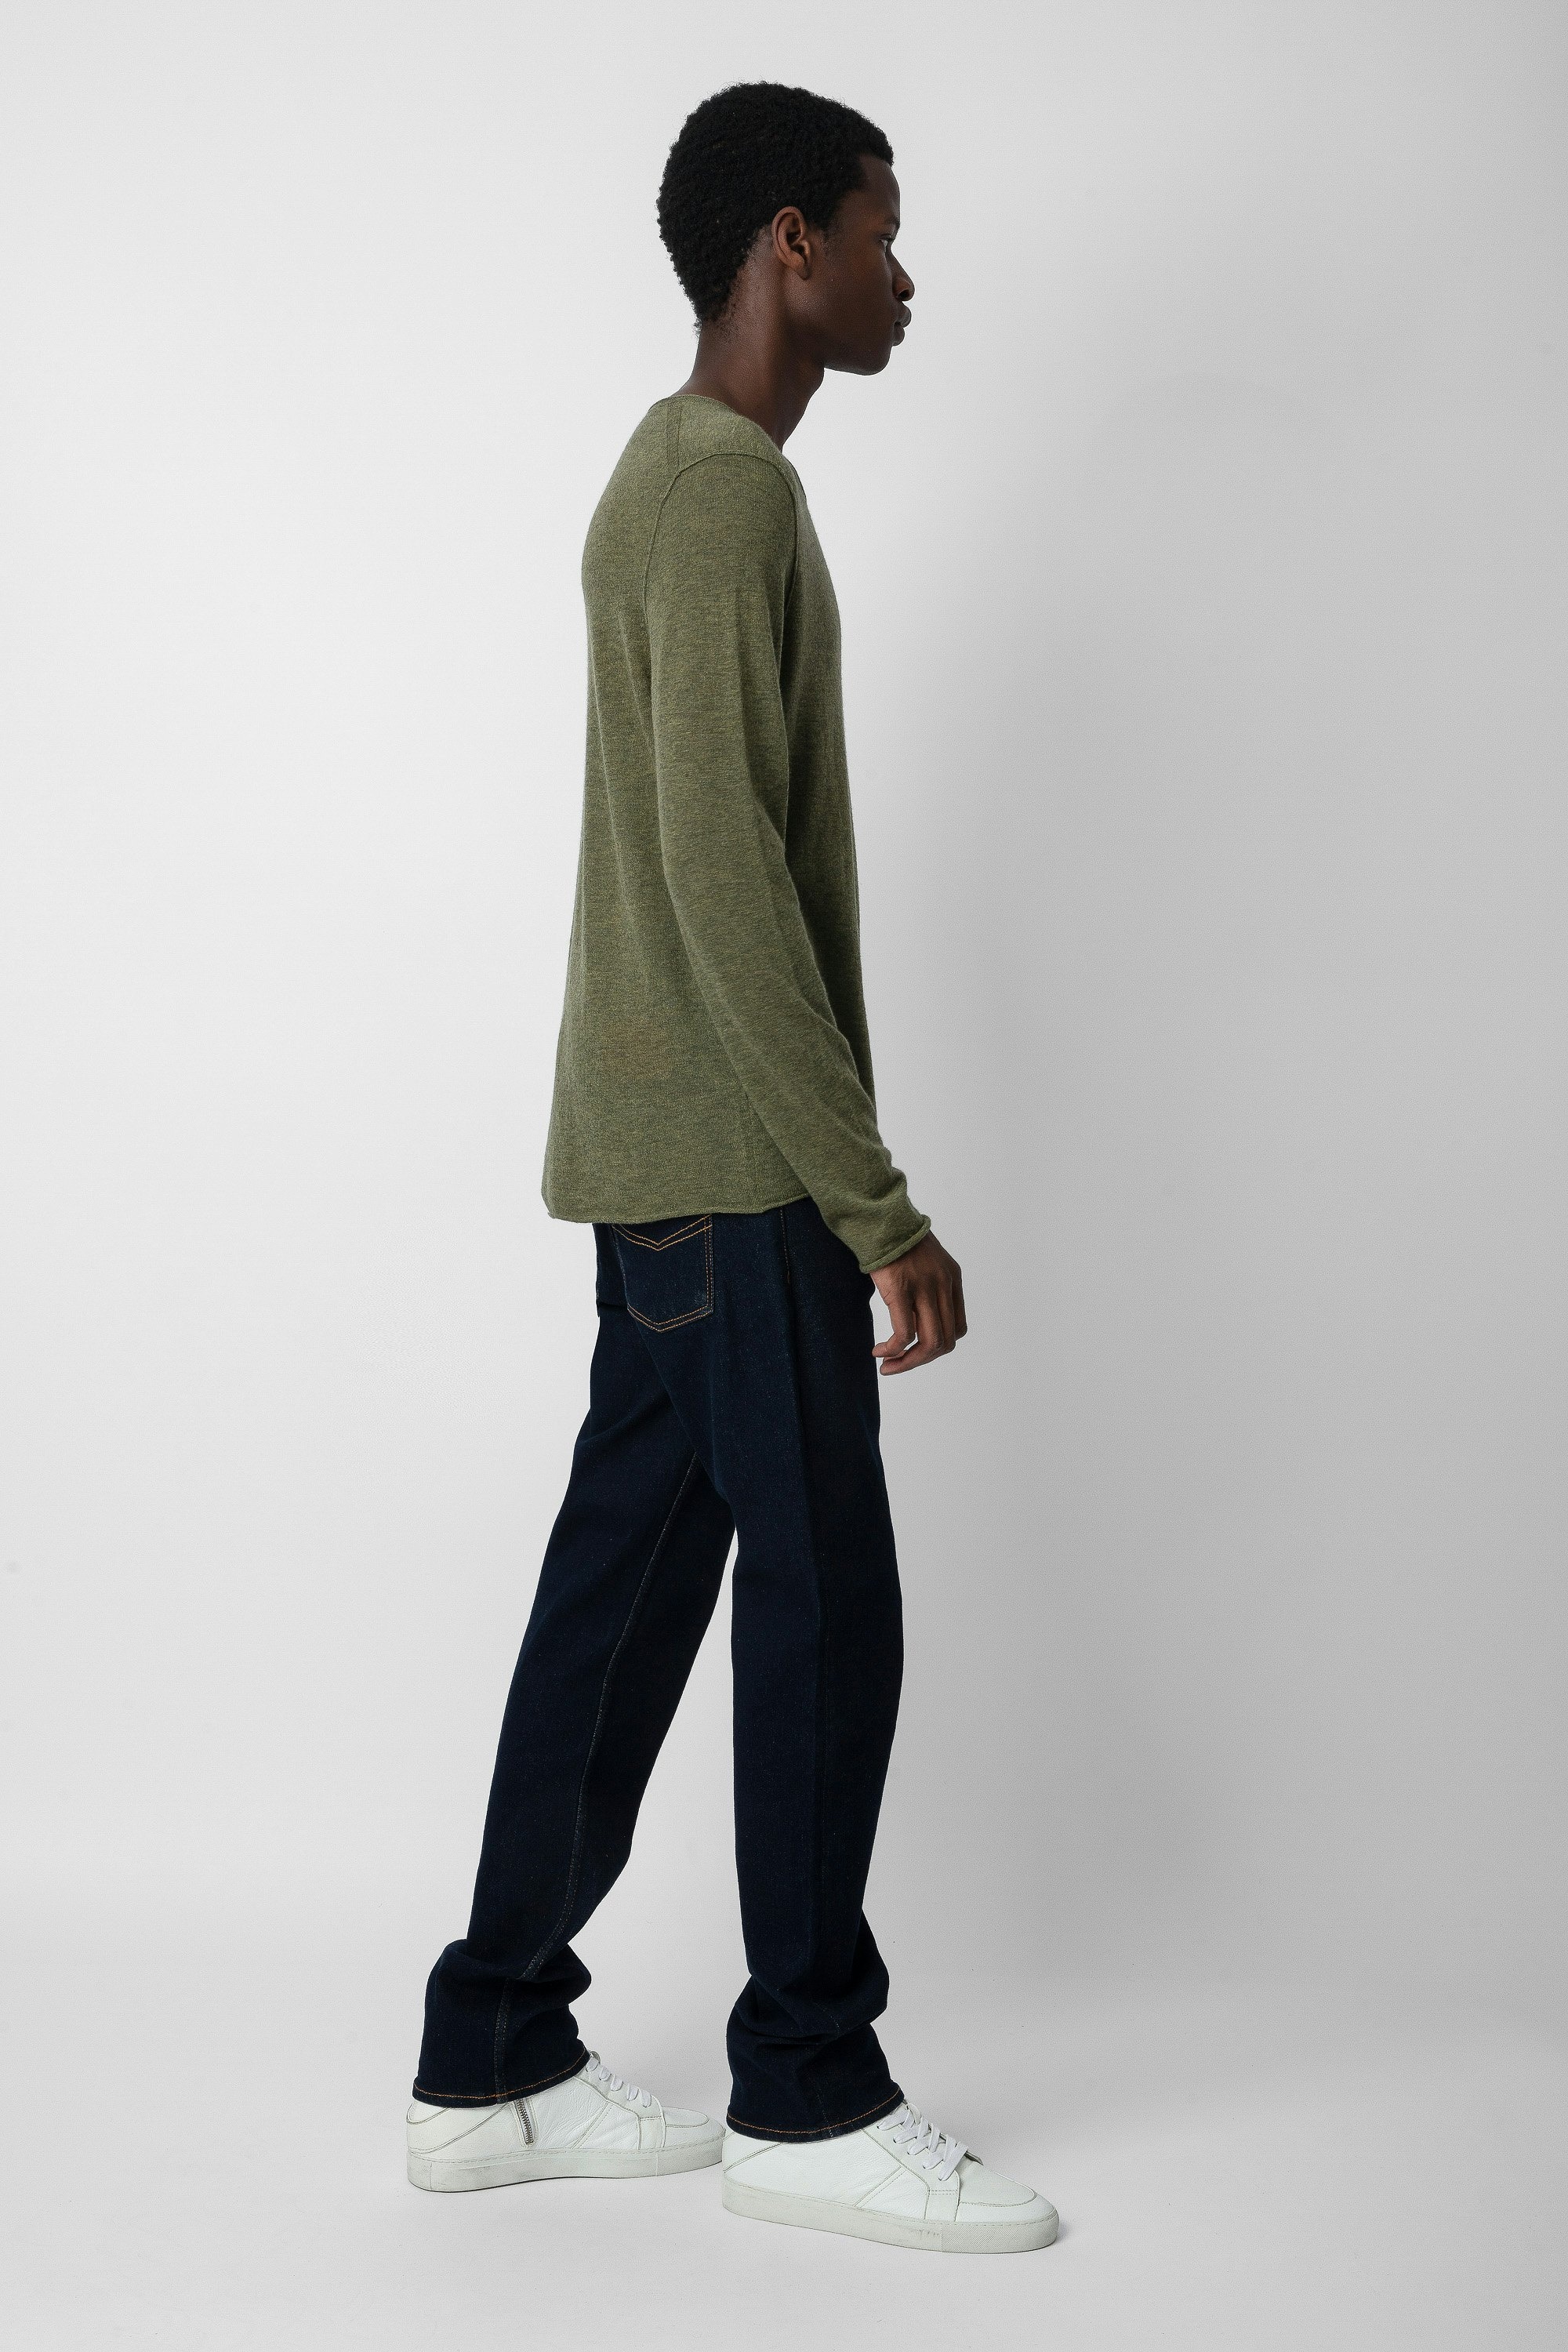 Teiss Cashmere Sweater - 3